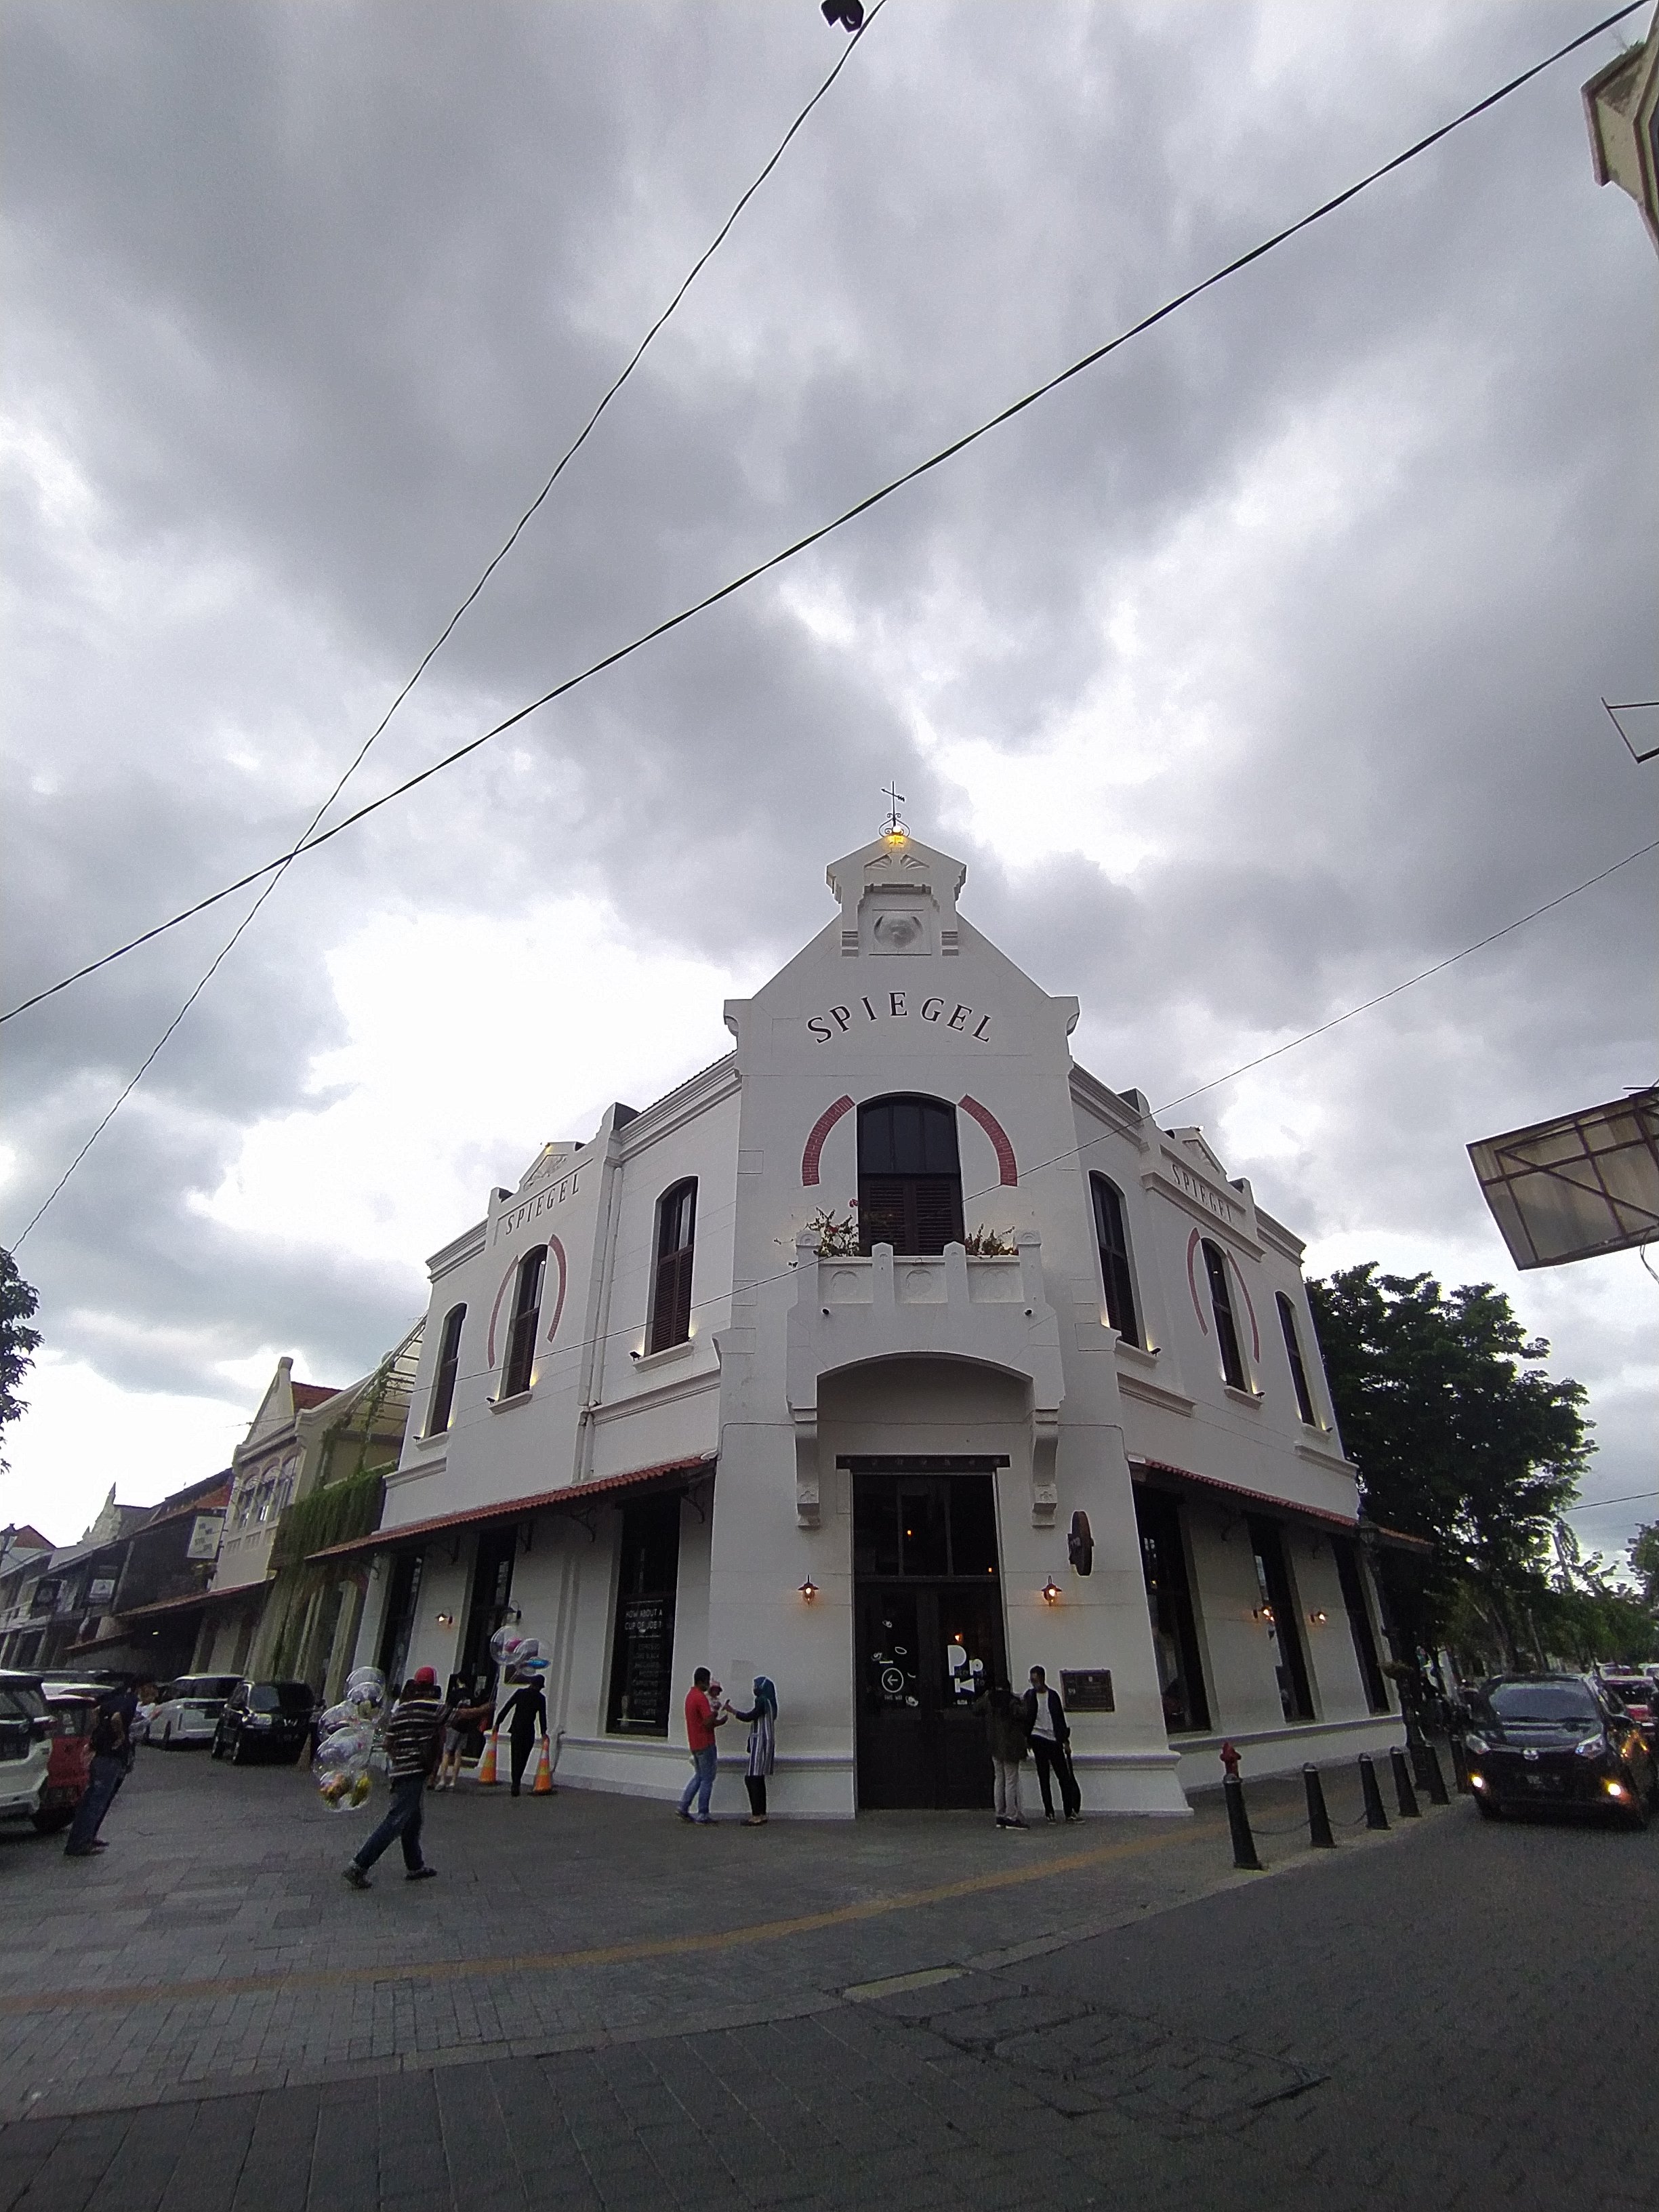 Spiegel Bar and Bistro, an old building in Old Town (Kota Lama) in Semarang